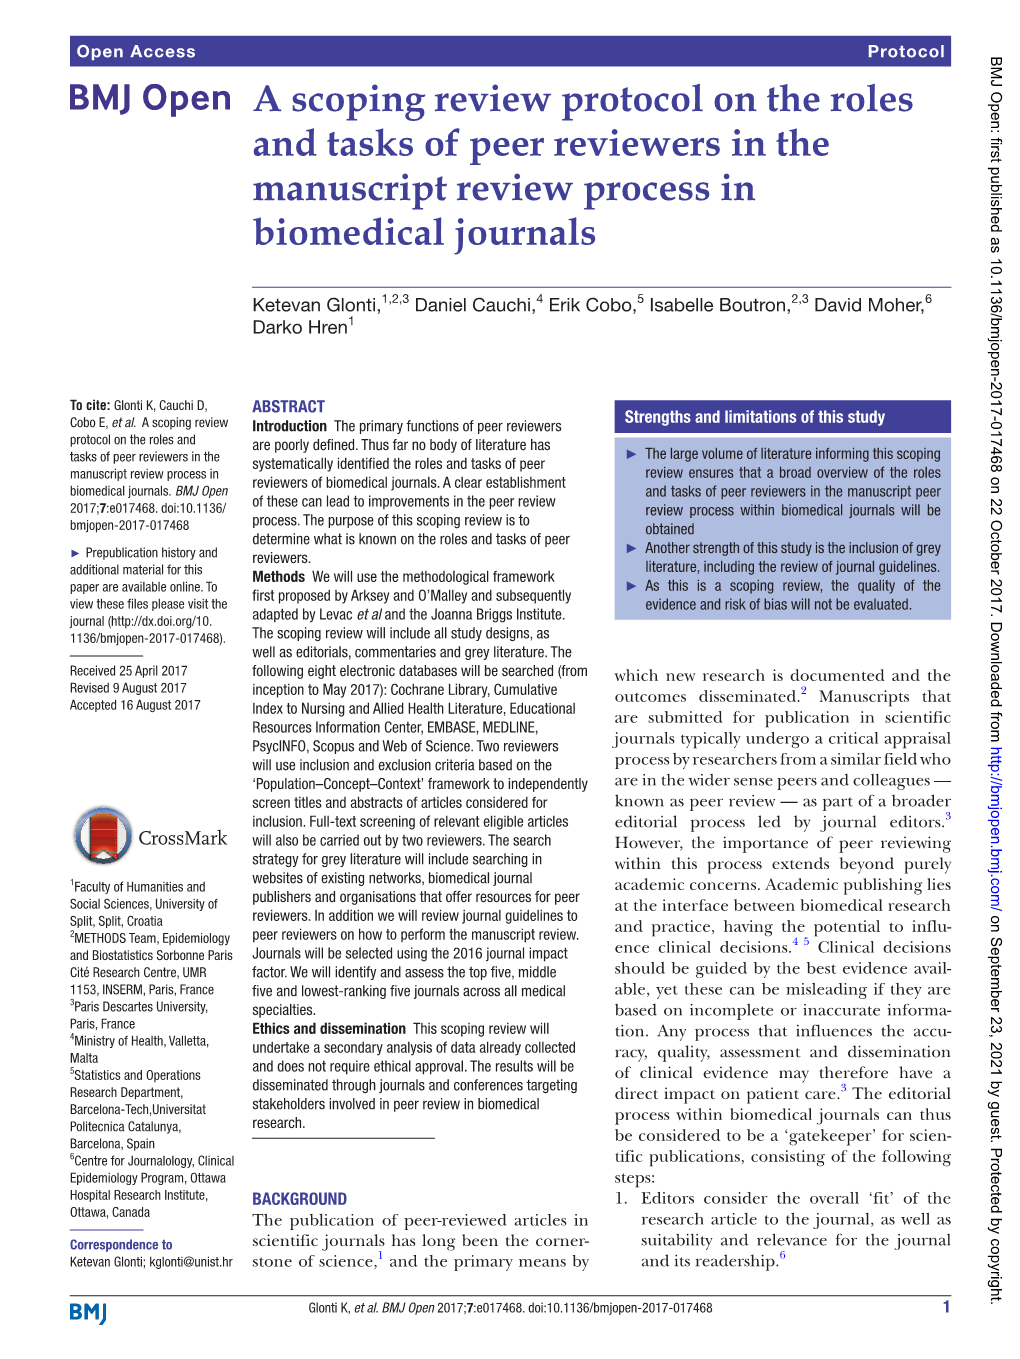 A Scoping Review Protocol on the Roles and Tasks of Peer Reviewers in the Manuscript Review Process in Biomedical Journals